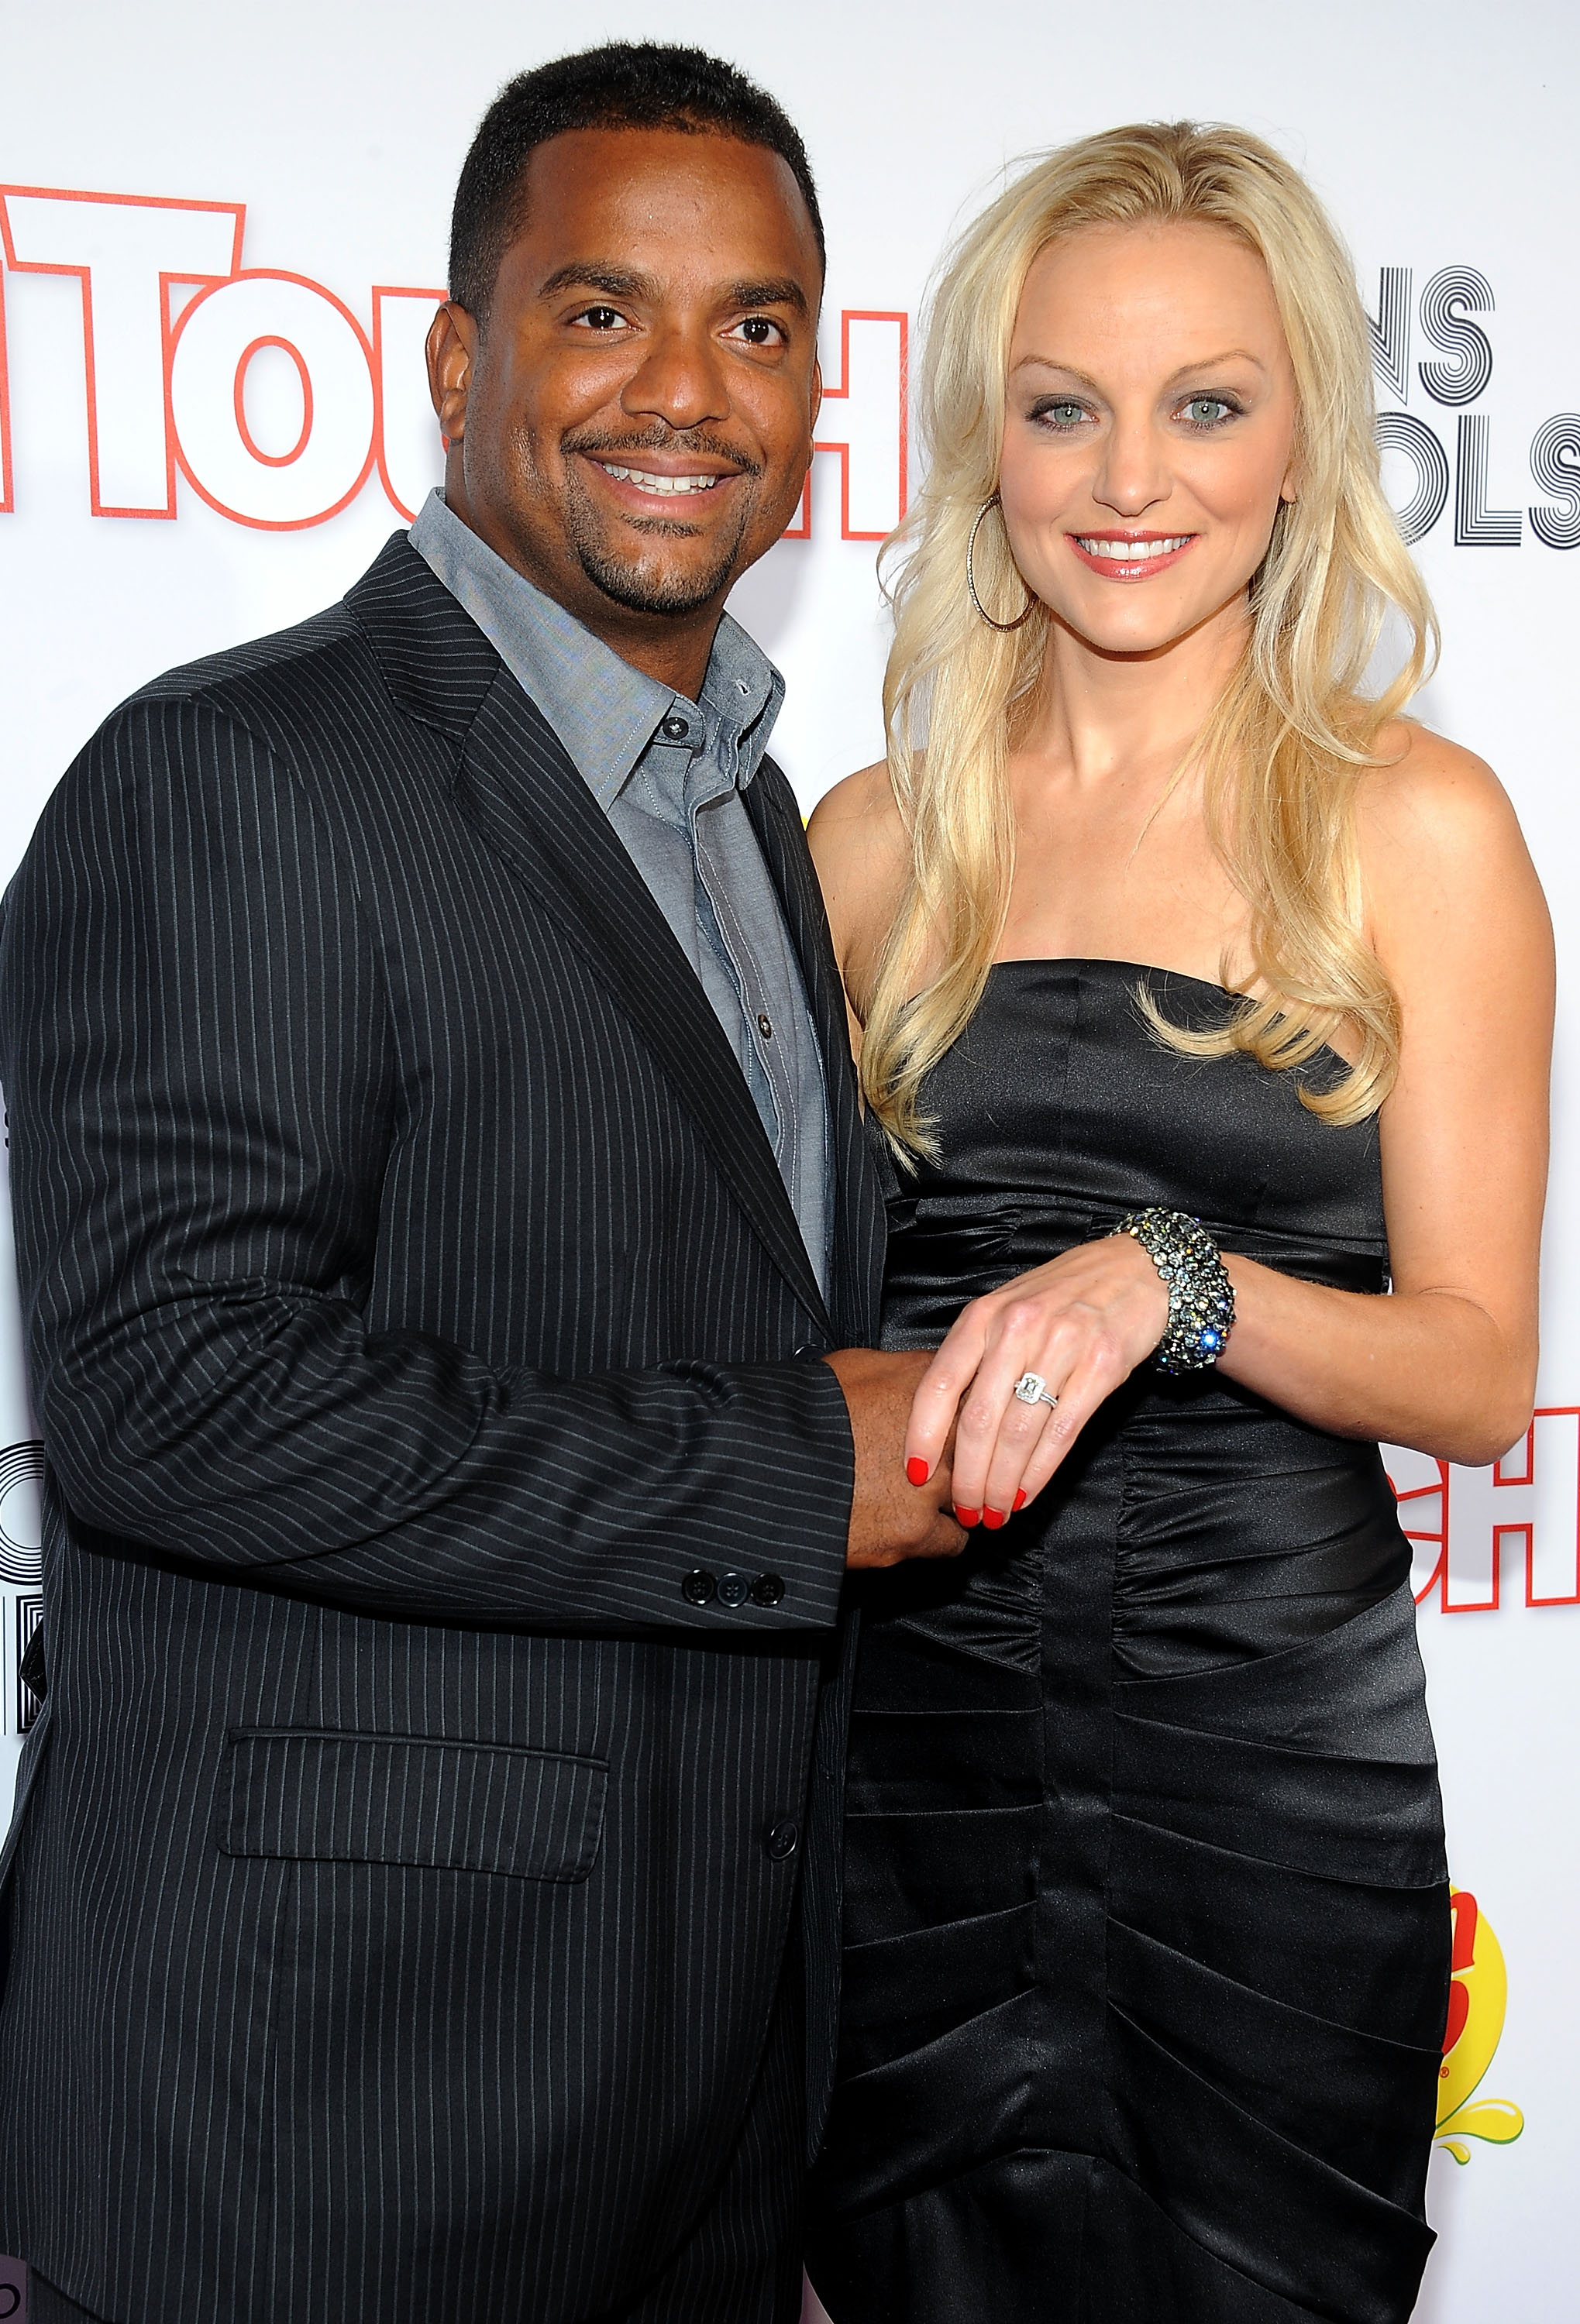 Alfonso Riberio and Angela Unkrich attend In Touch Weekly's 5th Annual 2012 Icons + Idols at Chateau Marmont on September 6, 2012 in Los Angeles, California | Source: Getty Images